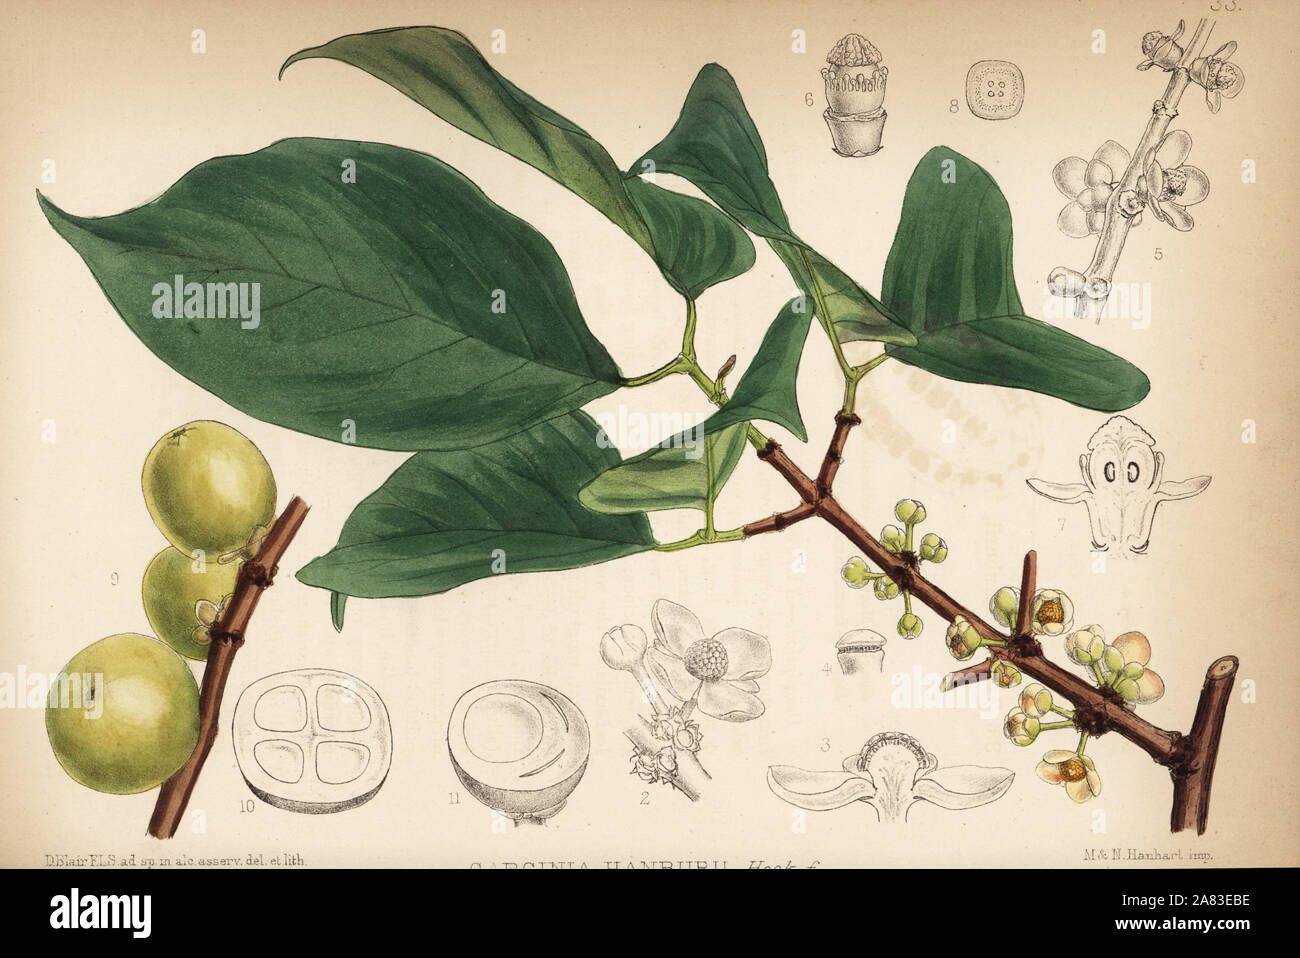 Siam gamboge or Hanbury's garcinia, Garcinia hanburyi. Handcoloured lithograph by Hanhart after a botanical illustration by David Blair from Robert Bentley and Henry Trimen's Medicinal Plants, London, 1880. Stock Photo